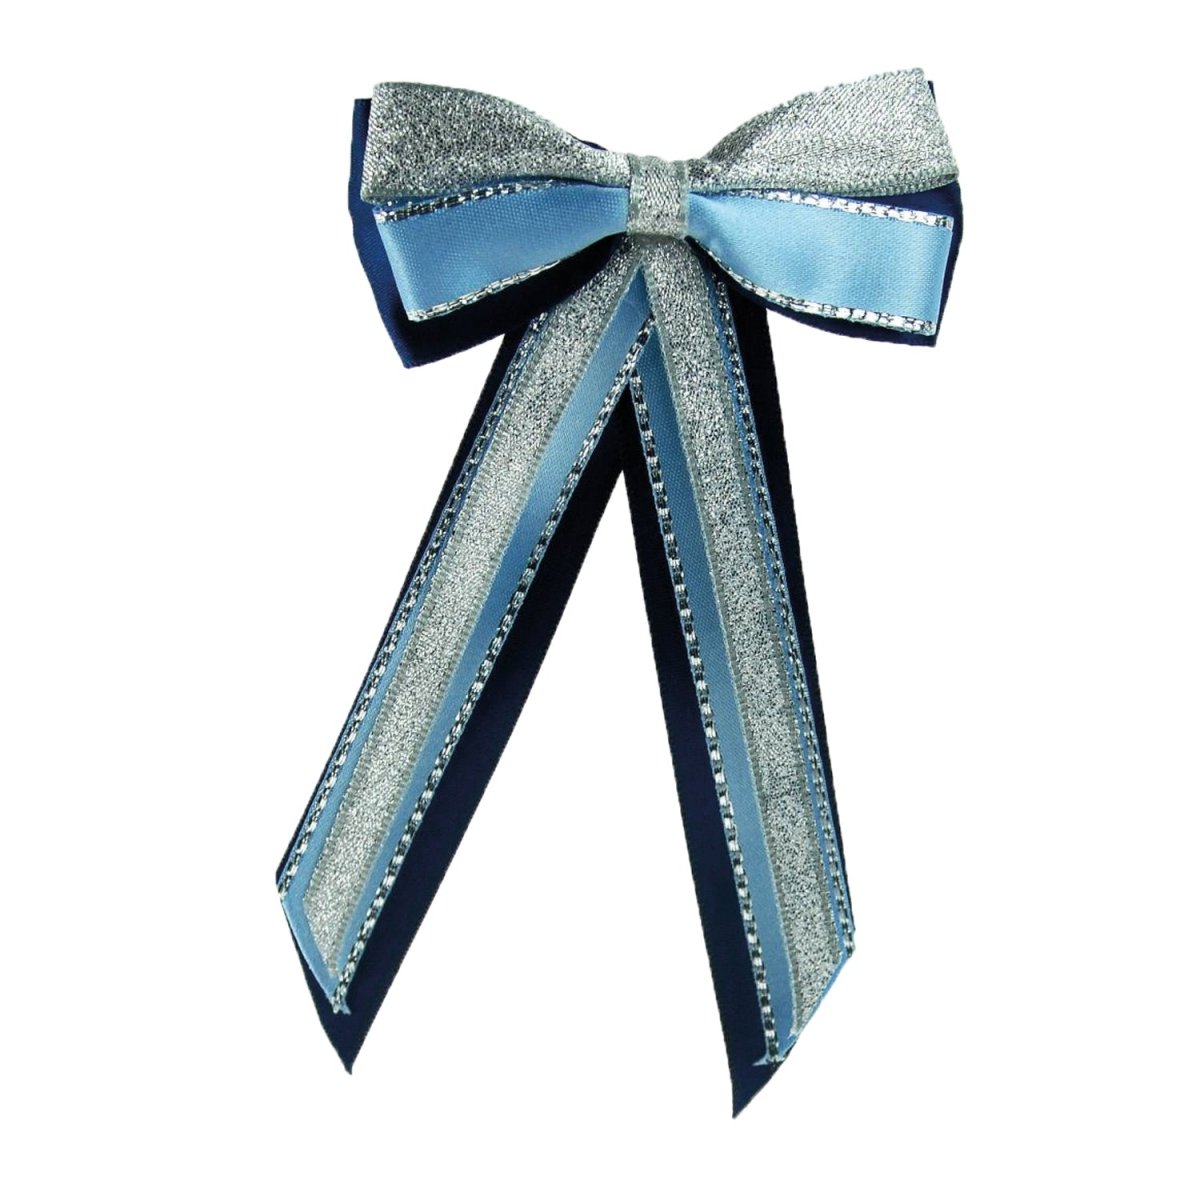 Showquest Hairbow & Tails - Navy/Pale Blue/Silver -